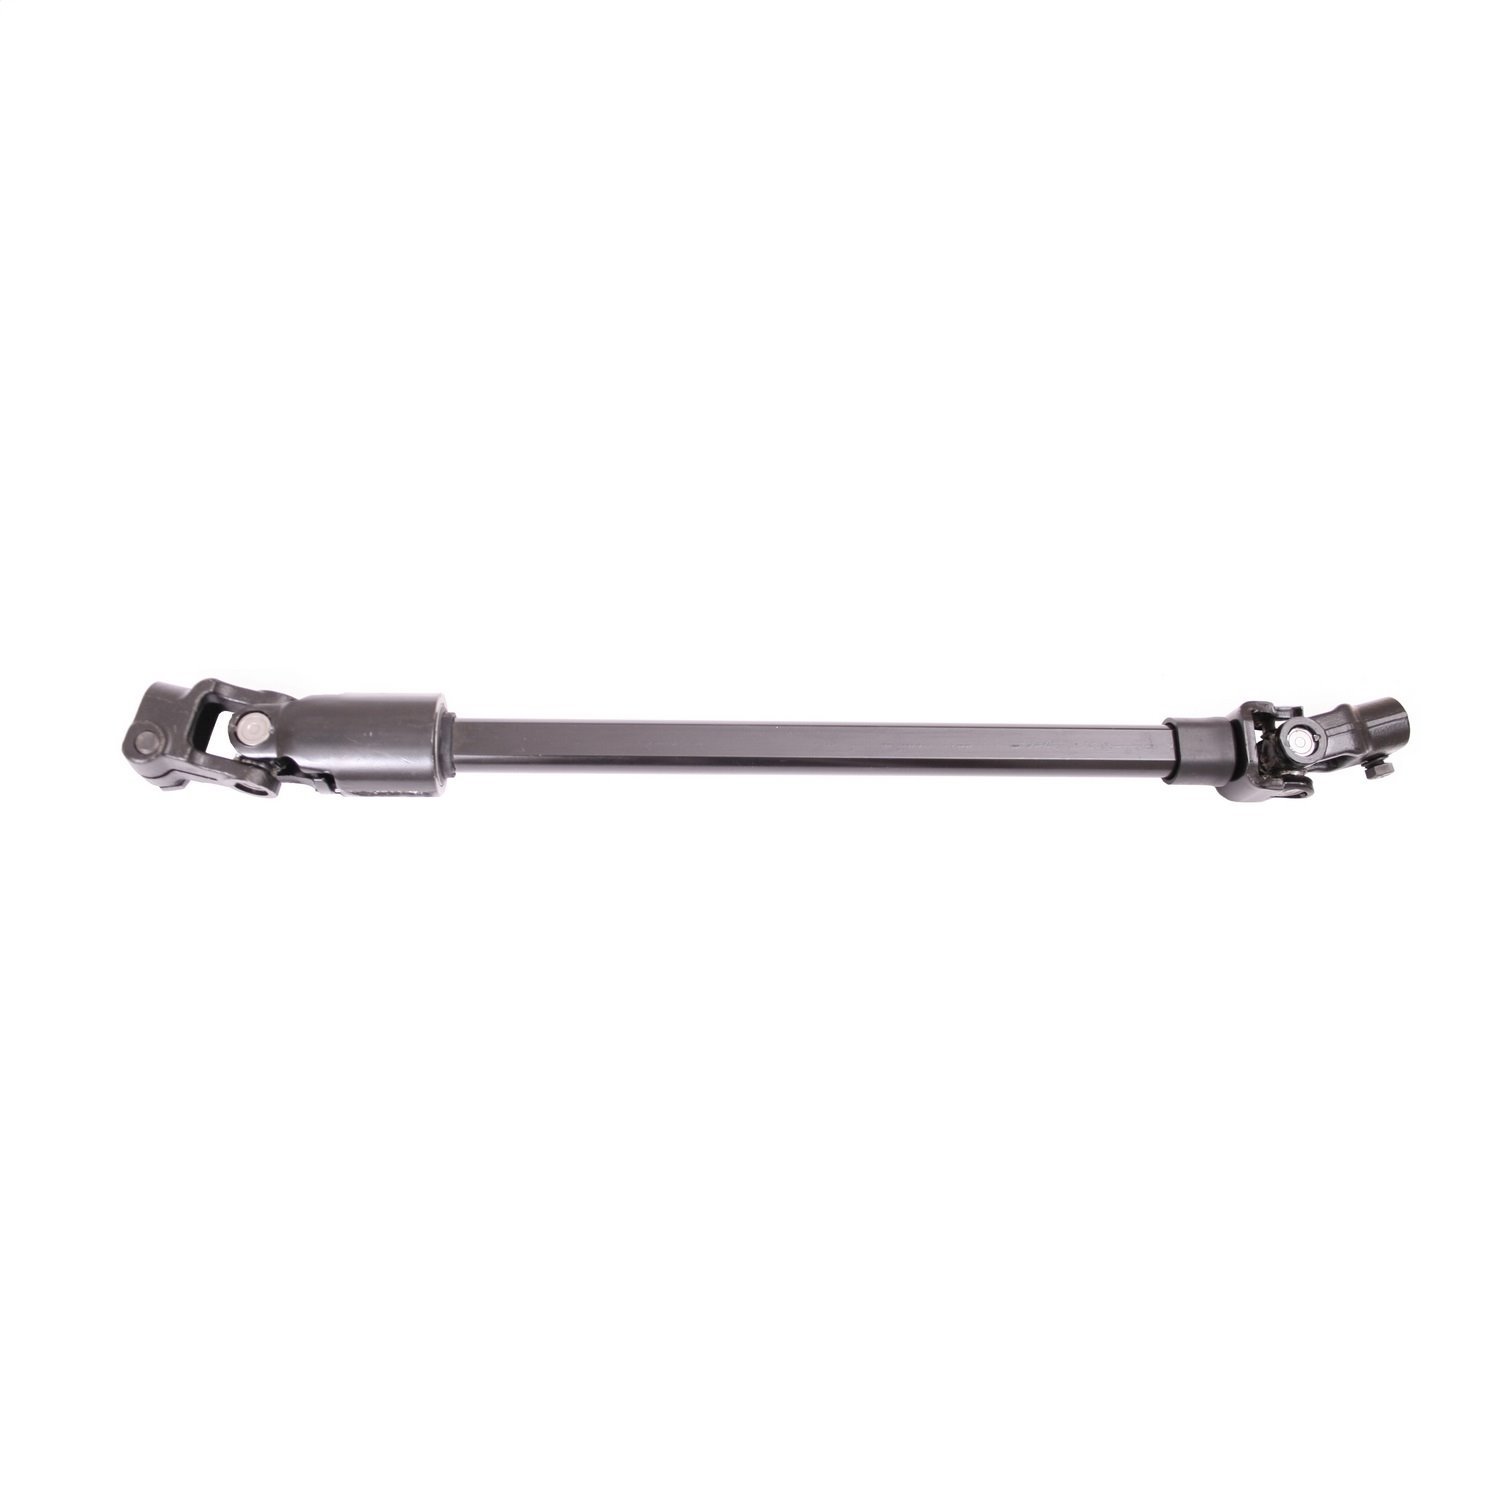 Factory-style replacement lower power steering shaft from